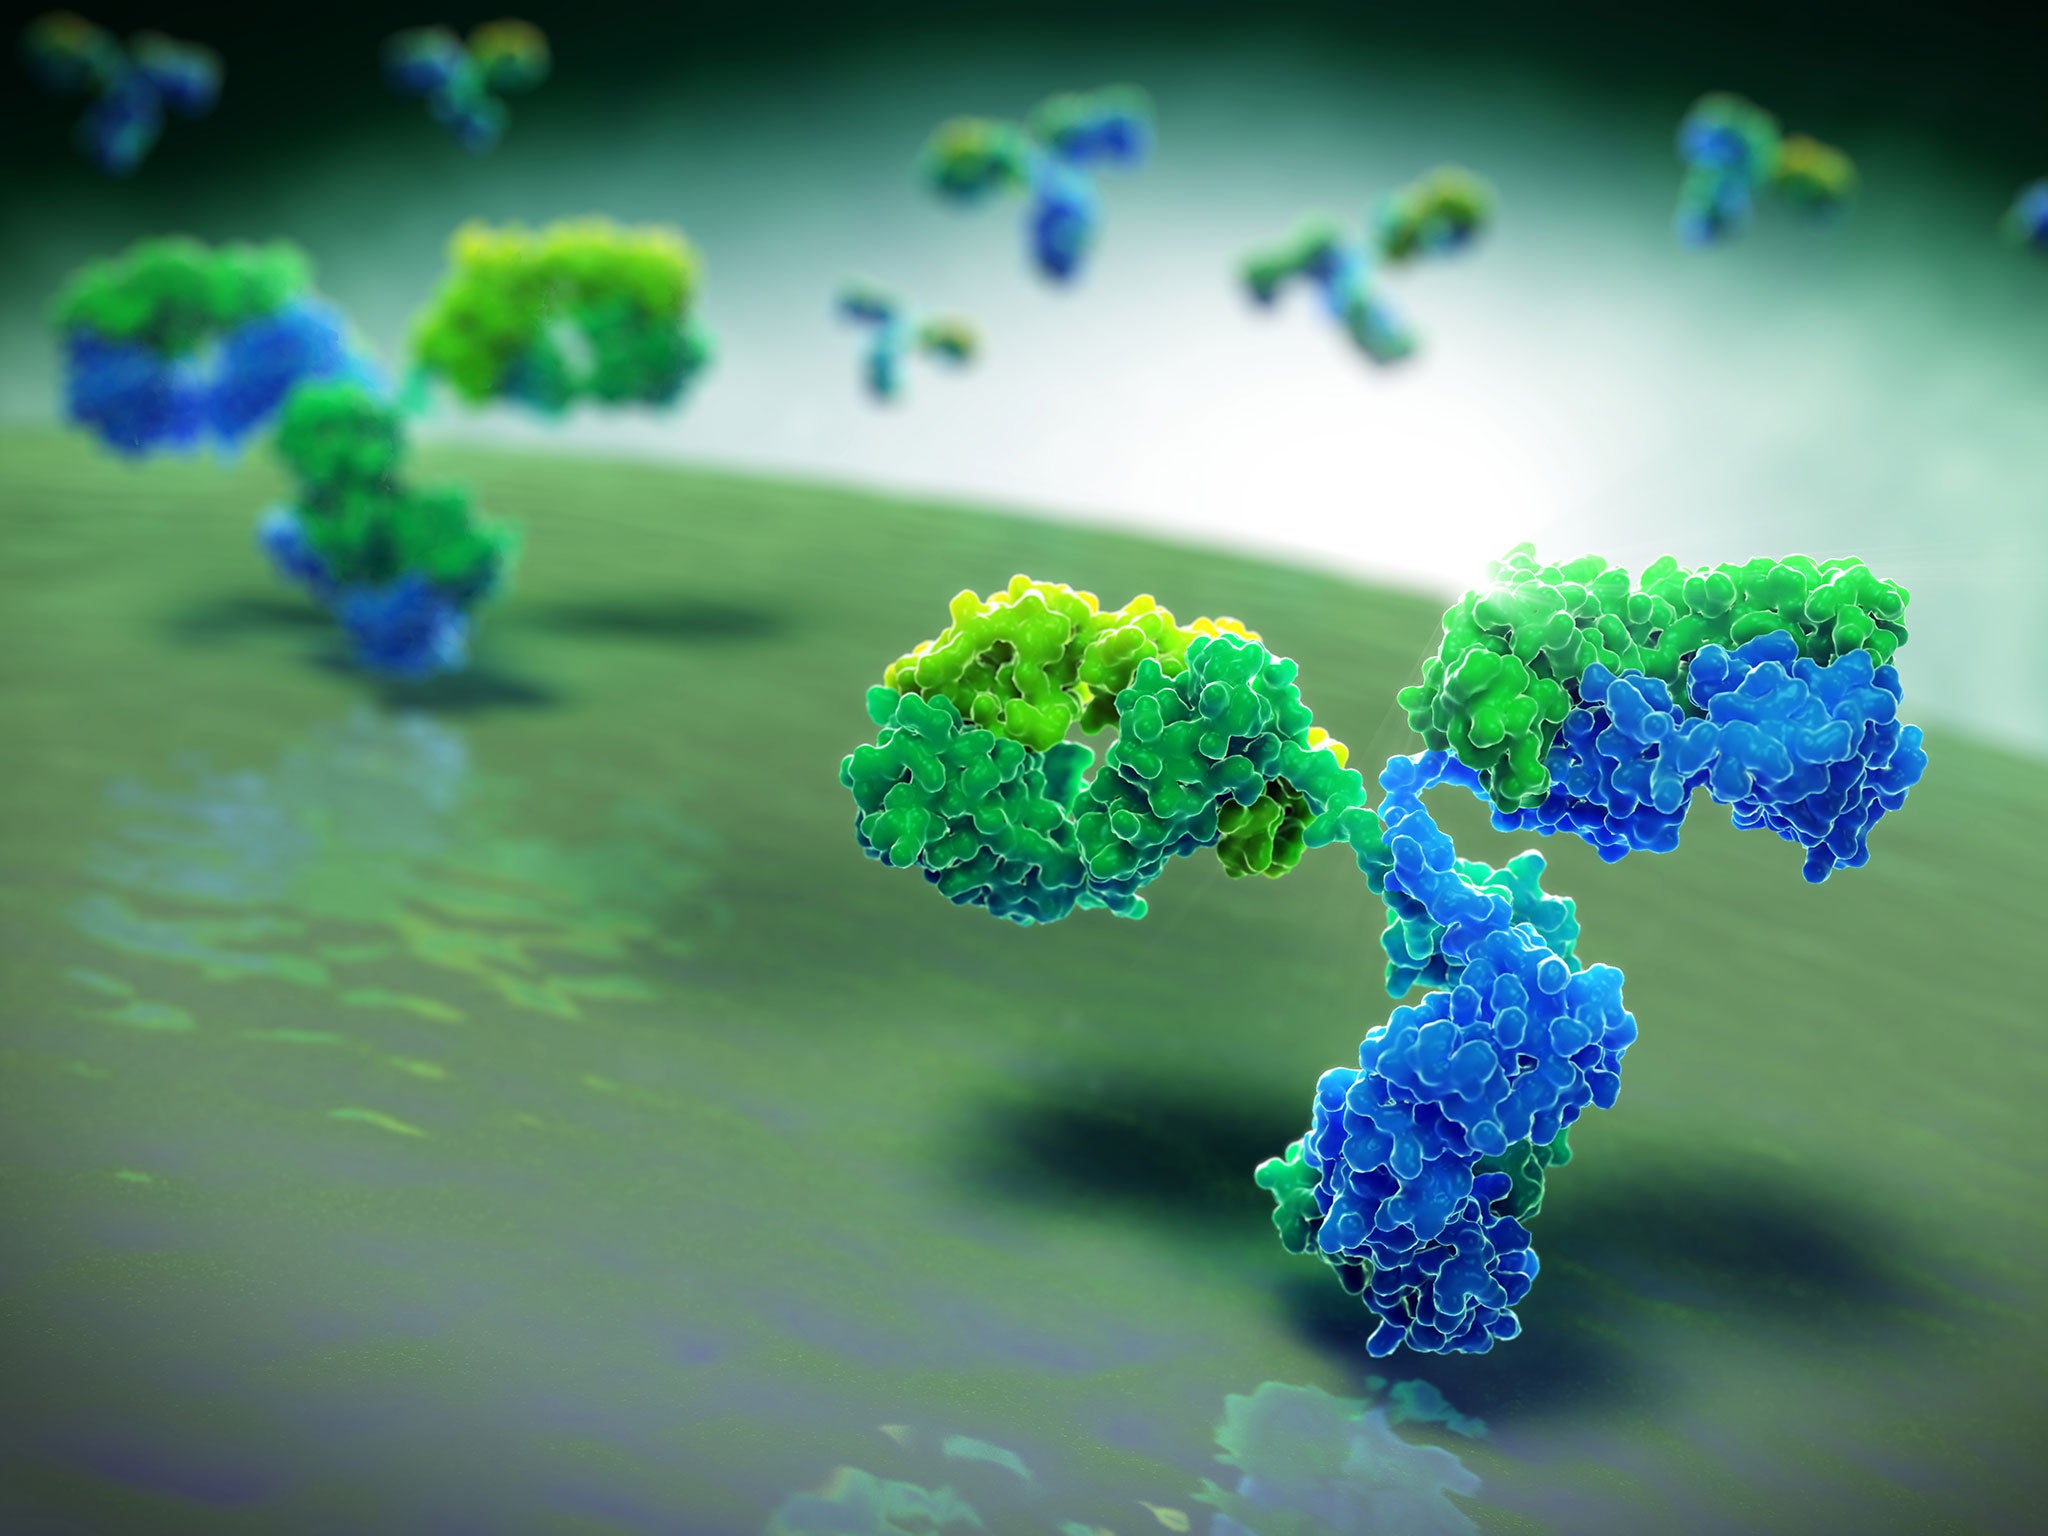 Scientists are following various approaches using antibodies, the proteins produced by the immune system to attack invading viruses and bacteria